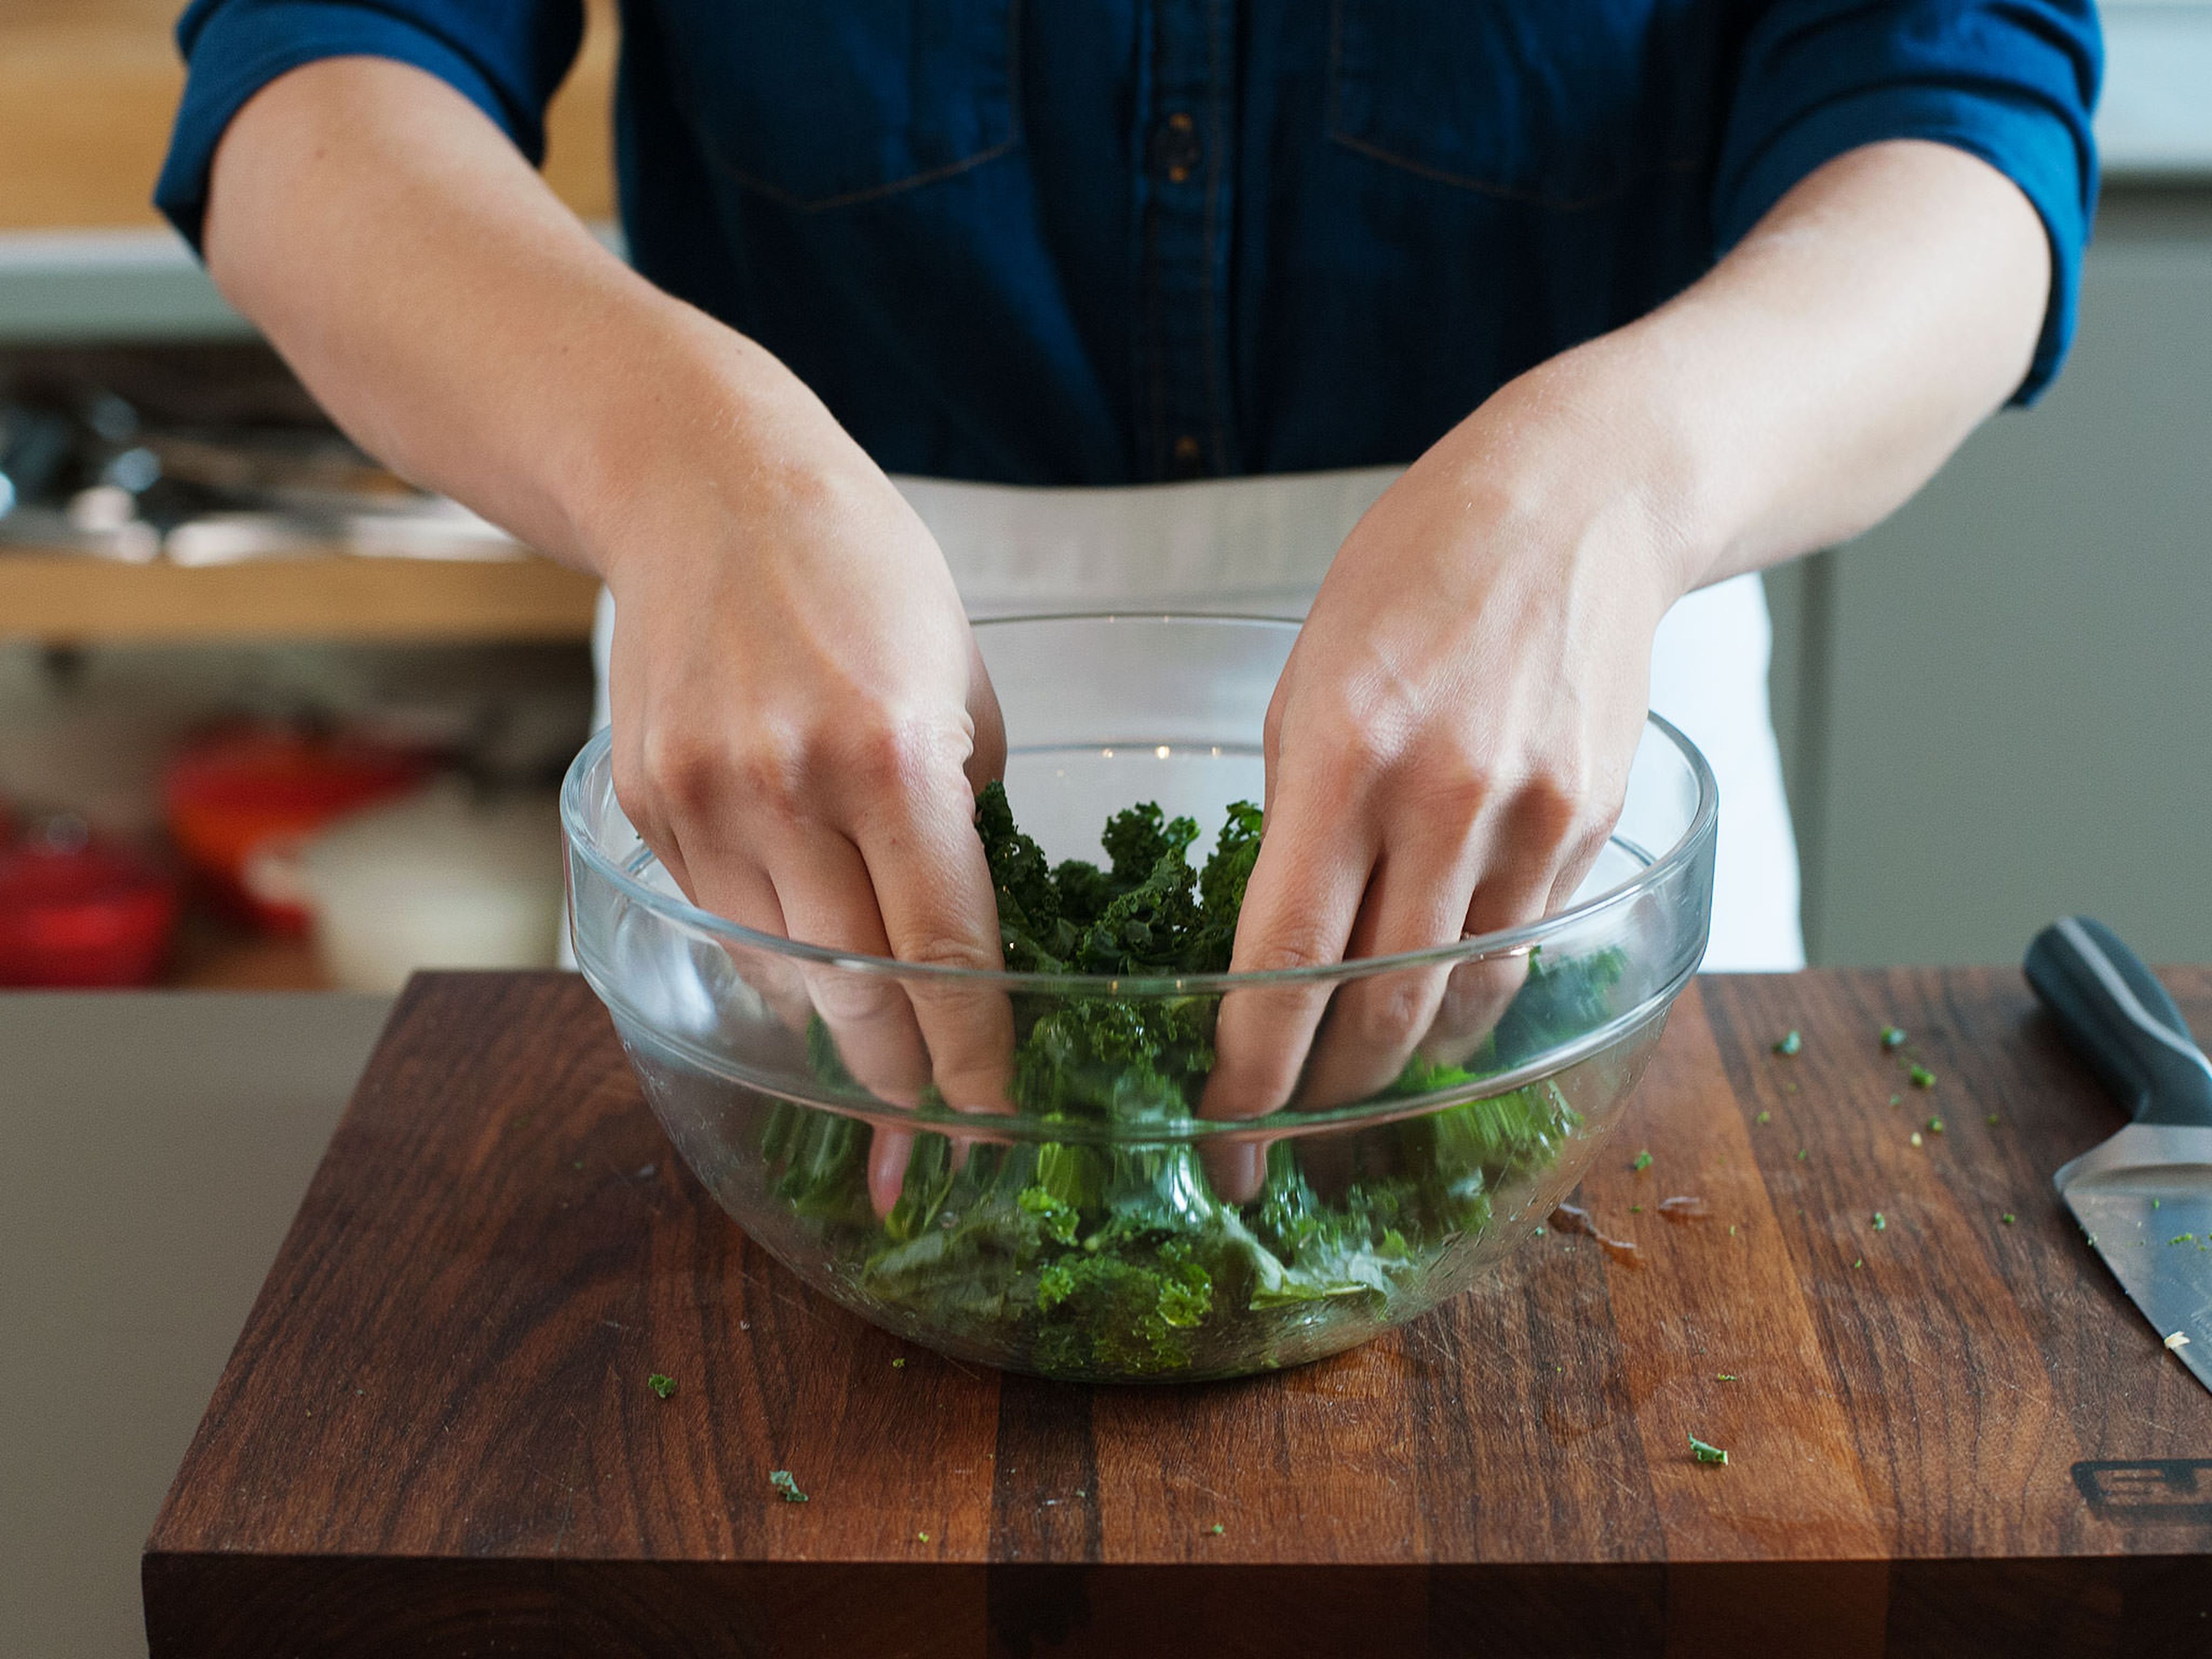 Remove stems from kale. Roughly chop or tear leaves with your hands. Transfer to a large mixing bowl along with some of the lemon juice and olive oil. Mix to coat and massage oil into kale to soften. Set aside.